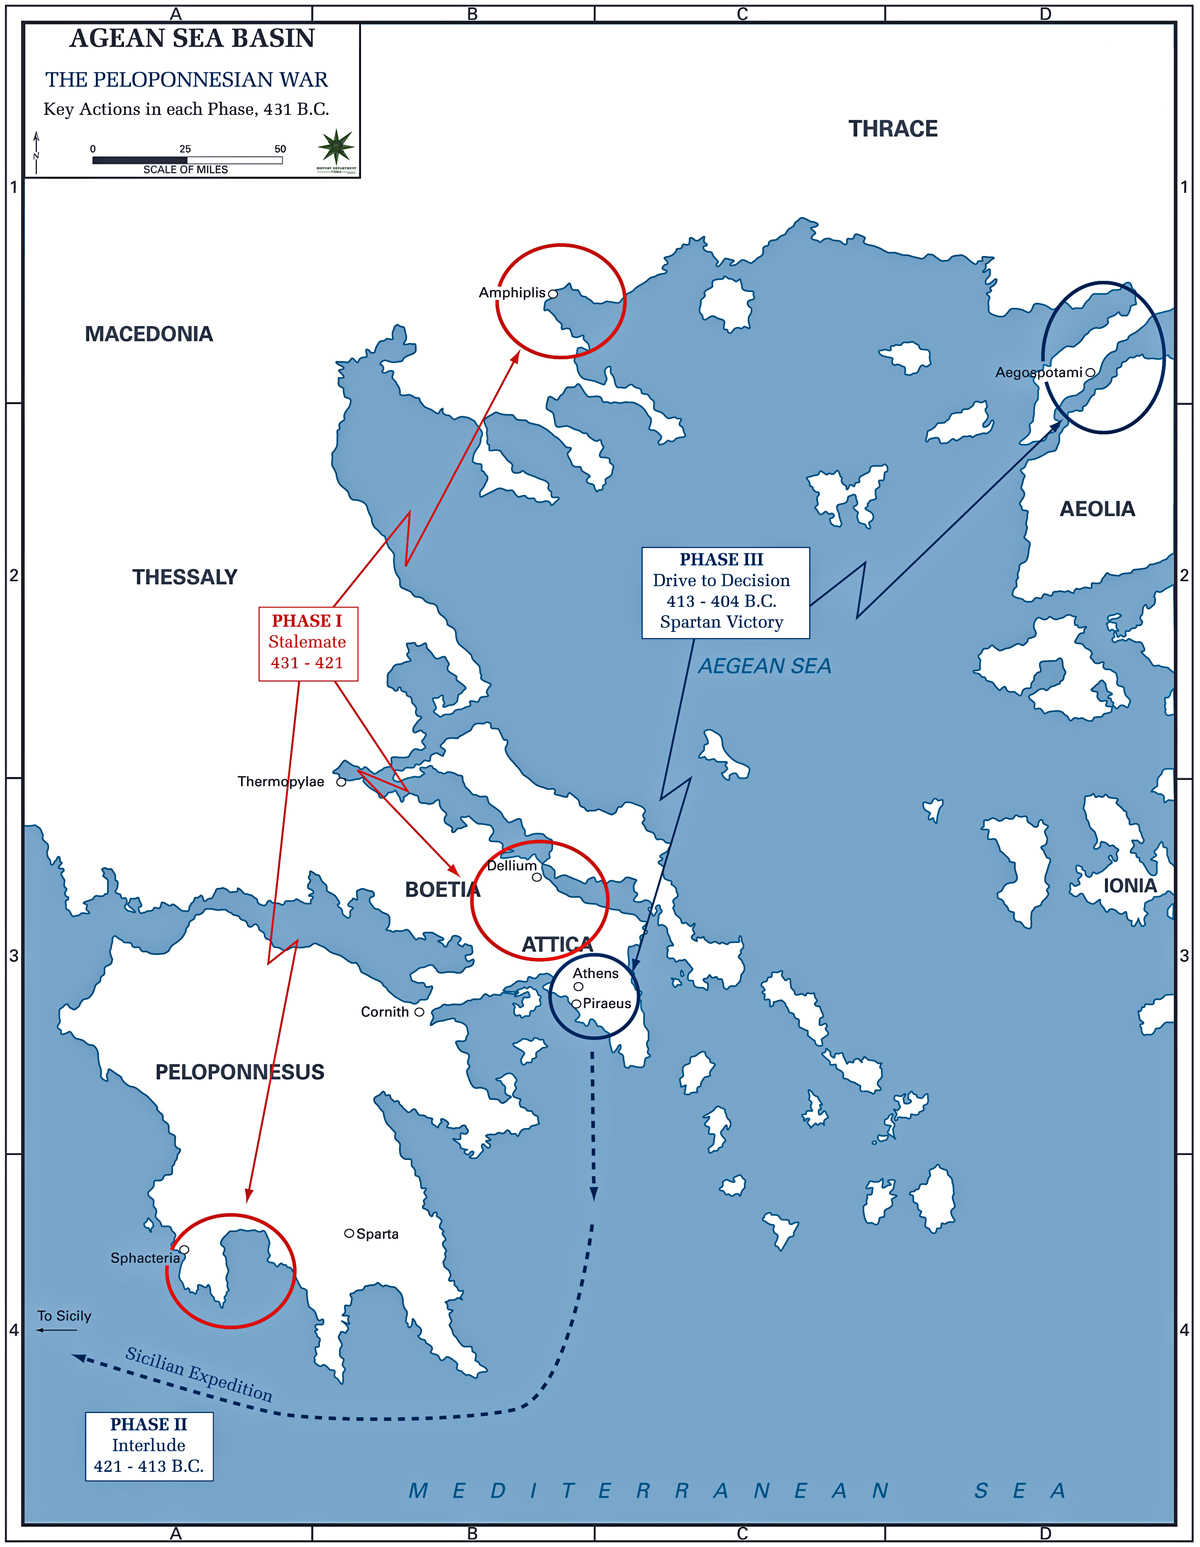 The Peloponnesian War - Key Actions in each Phase, 431 BC